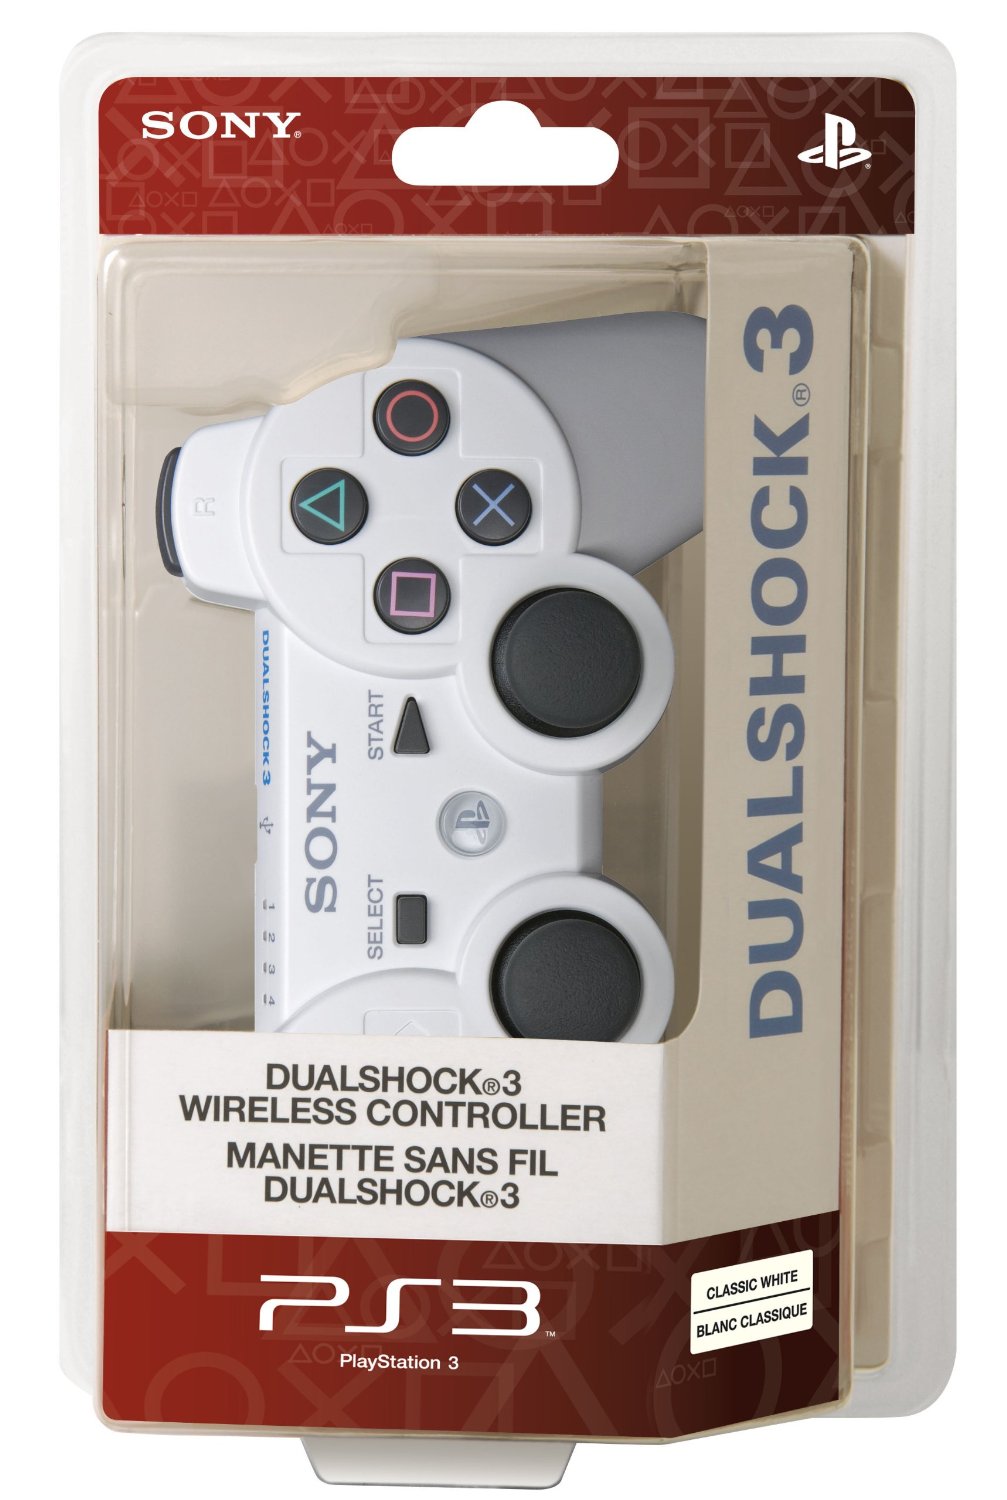 official Sony PlayStation 3 Dualshock 3 sans fil (Classic White)